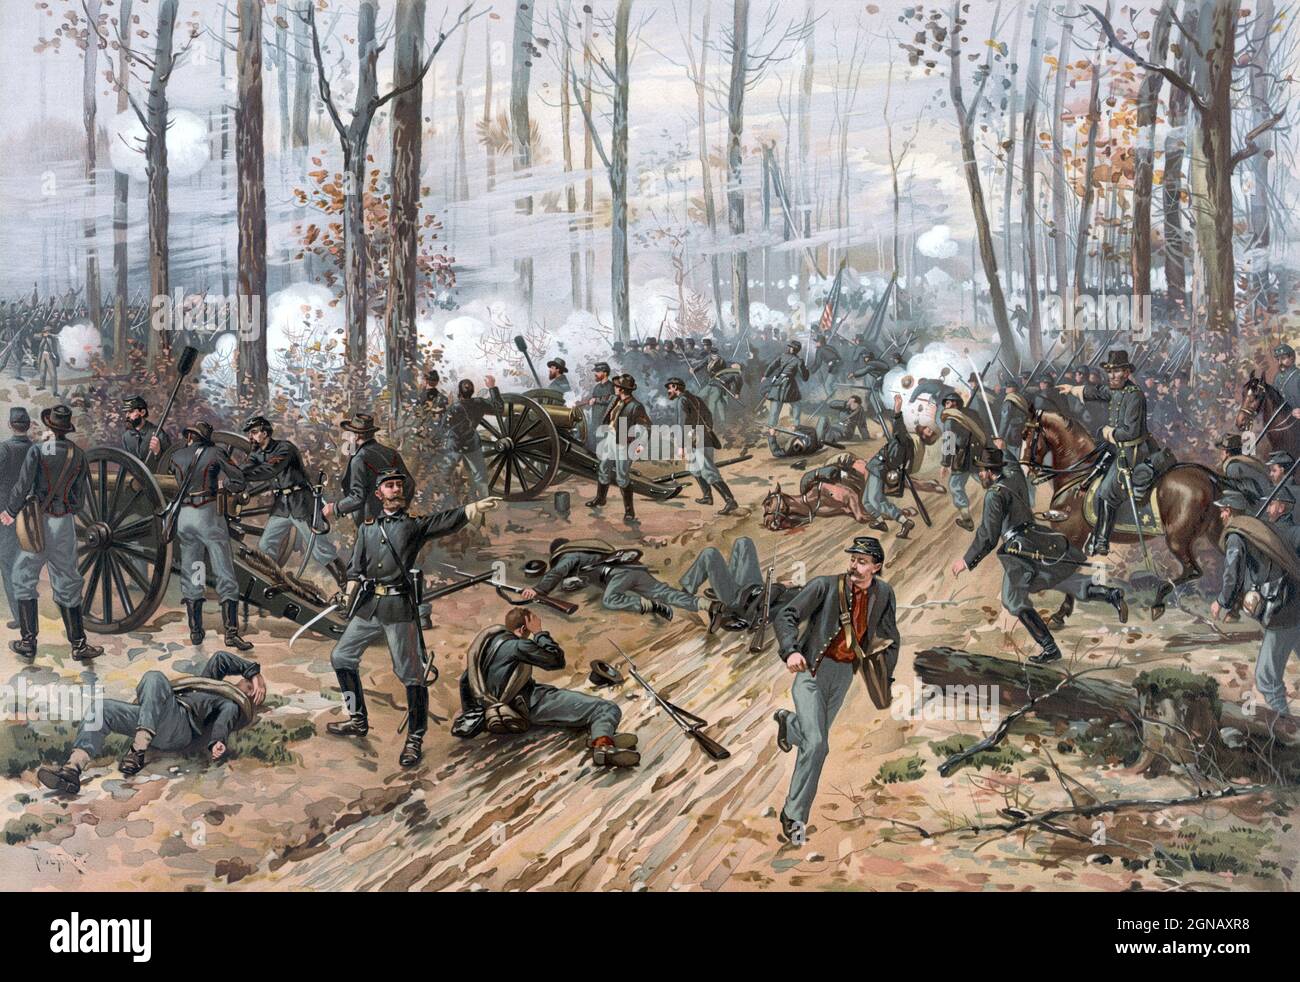 The Battle of Shiloh by Thure de Thulstrup (also known as the Battle of Pittsburg Landing) was an early battle in the Western Theater of the American Civil War, fought April 6–7, 1862, in southwestern Tennessee. The Union Army of the Tennessee (Major General Ulysses S. Grant) had moved via the Tennessee River deep into Tennessee and was encamped principally at Pittsburg Landing on the west bank of the Tennessee River, where the Confederate Army of Mississippi (General Albert Sidney Johnston, P. G. T. Beauregard second-in-command) launched a surprise attack on Grant's army from its base in Cori Stock Photo